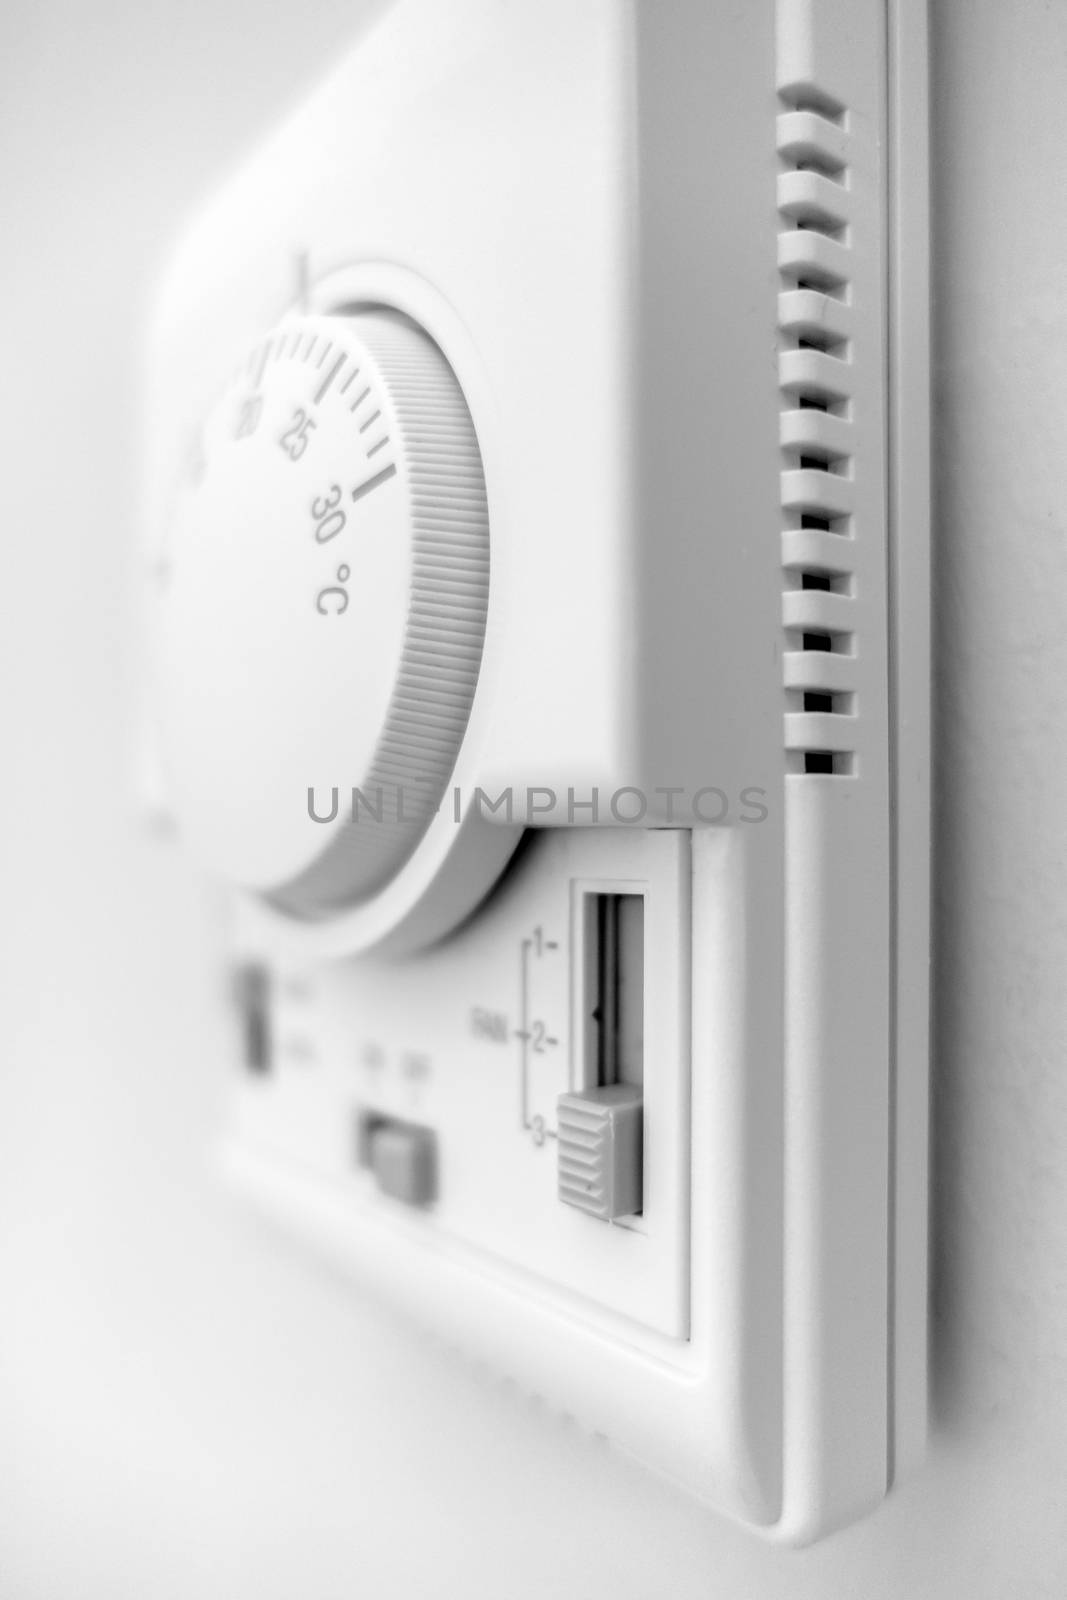 Hand adjusting thermostat. hand turning on thermostat climate control. Defocused blurry background.